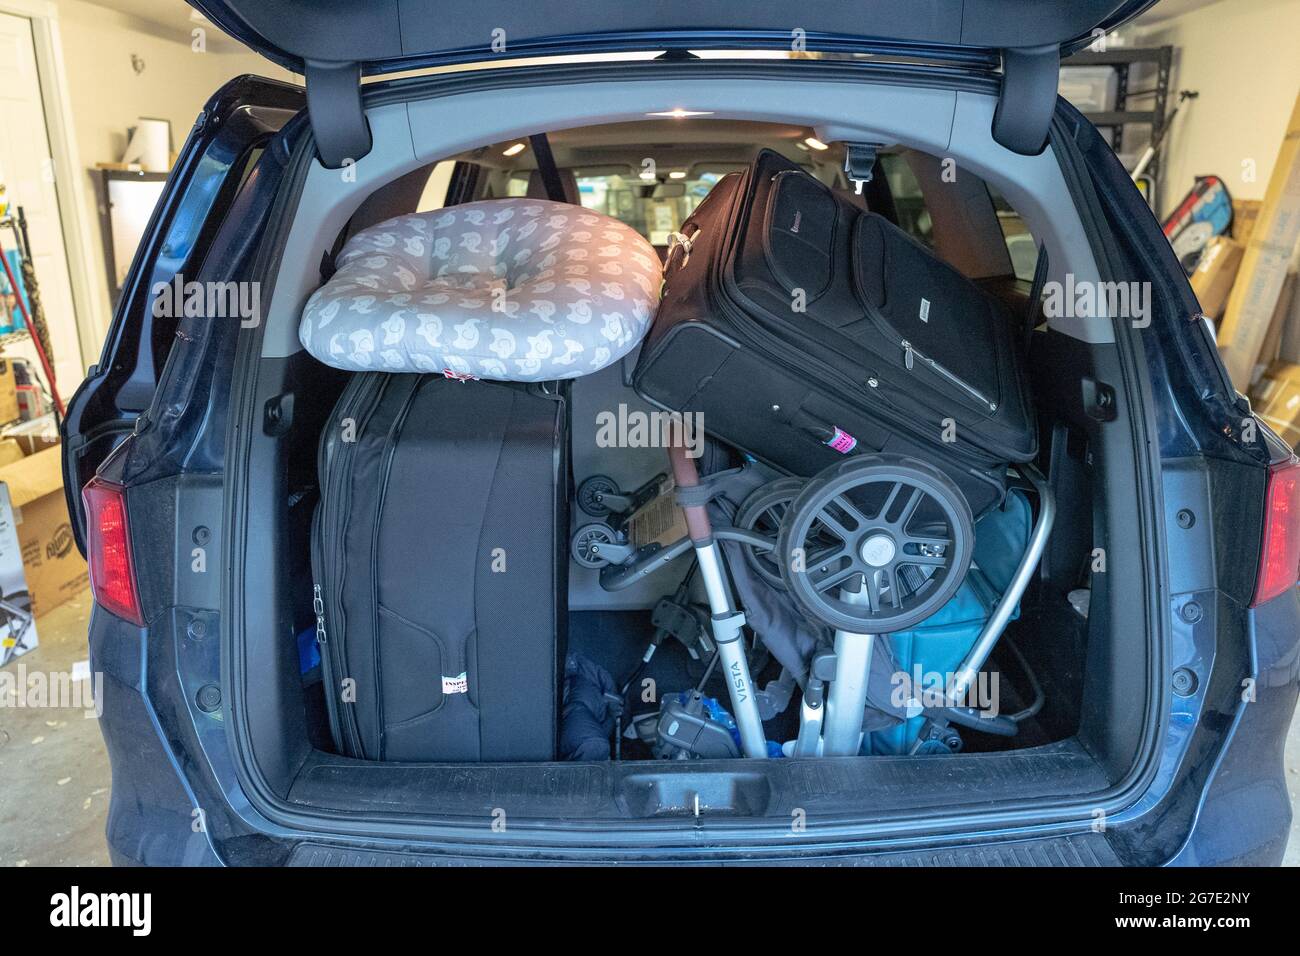 Rear view of open trunk of a minivan in suburban garage packed fully with suitcases and a stroller in preparation for travel or a vacation, Lafayette, California, May 28, 2021. () Stock Photo